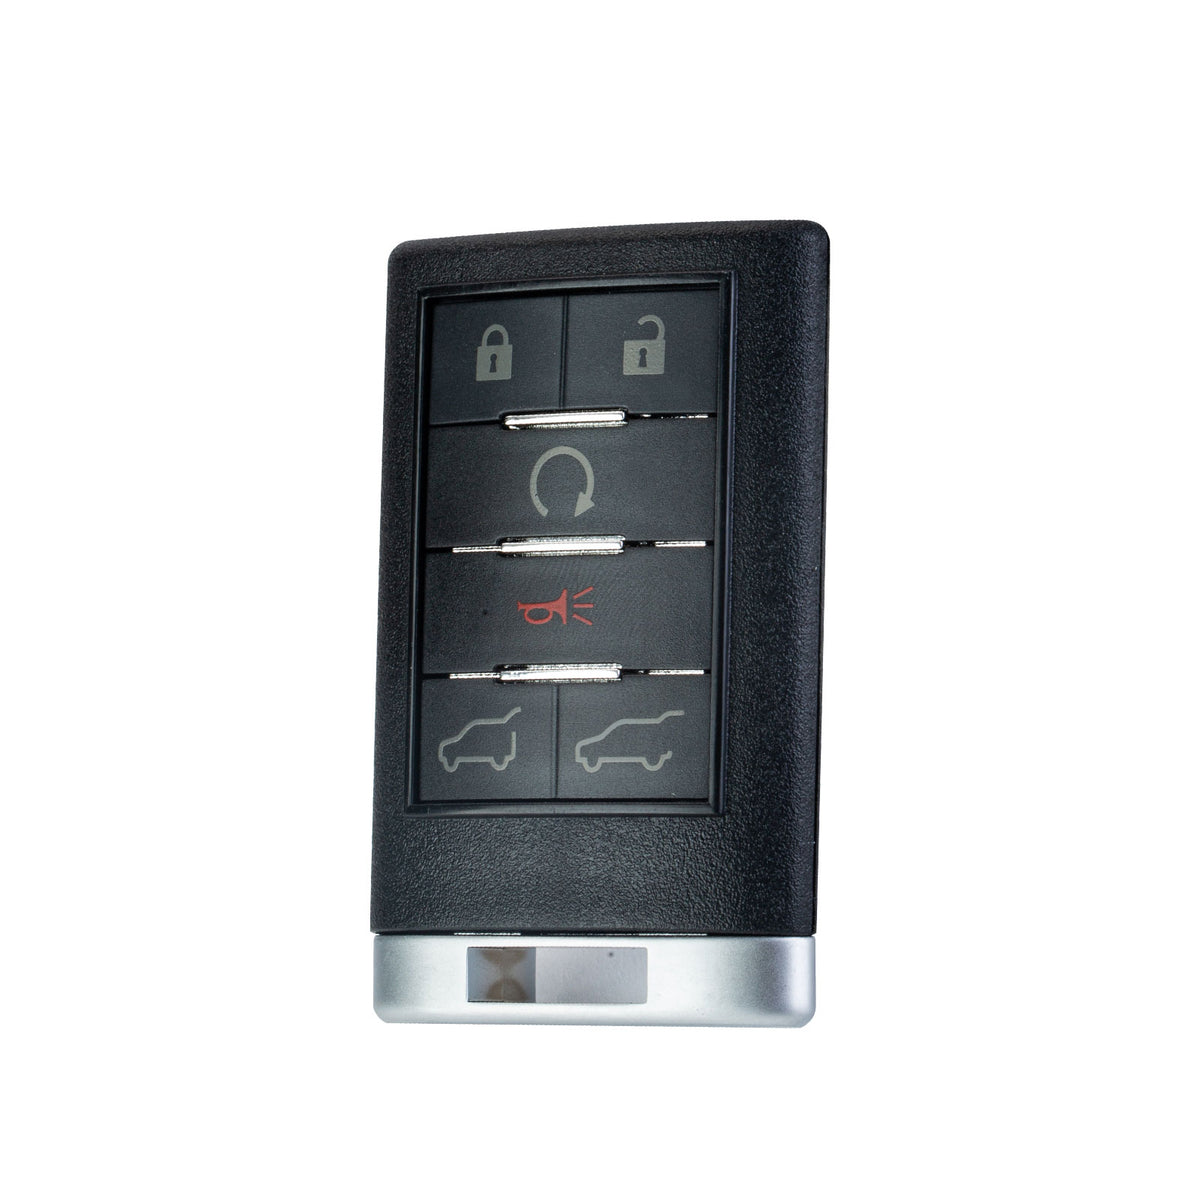 6 BTN Car Key Fob Keyless Control Entry Remote Replacement for 2007-2014 Escalade ESV EXT OUC6000066  KR-G6RA